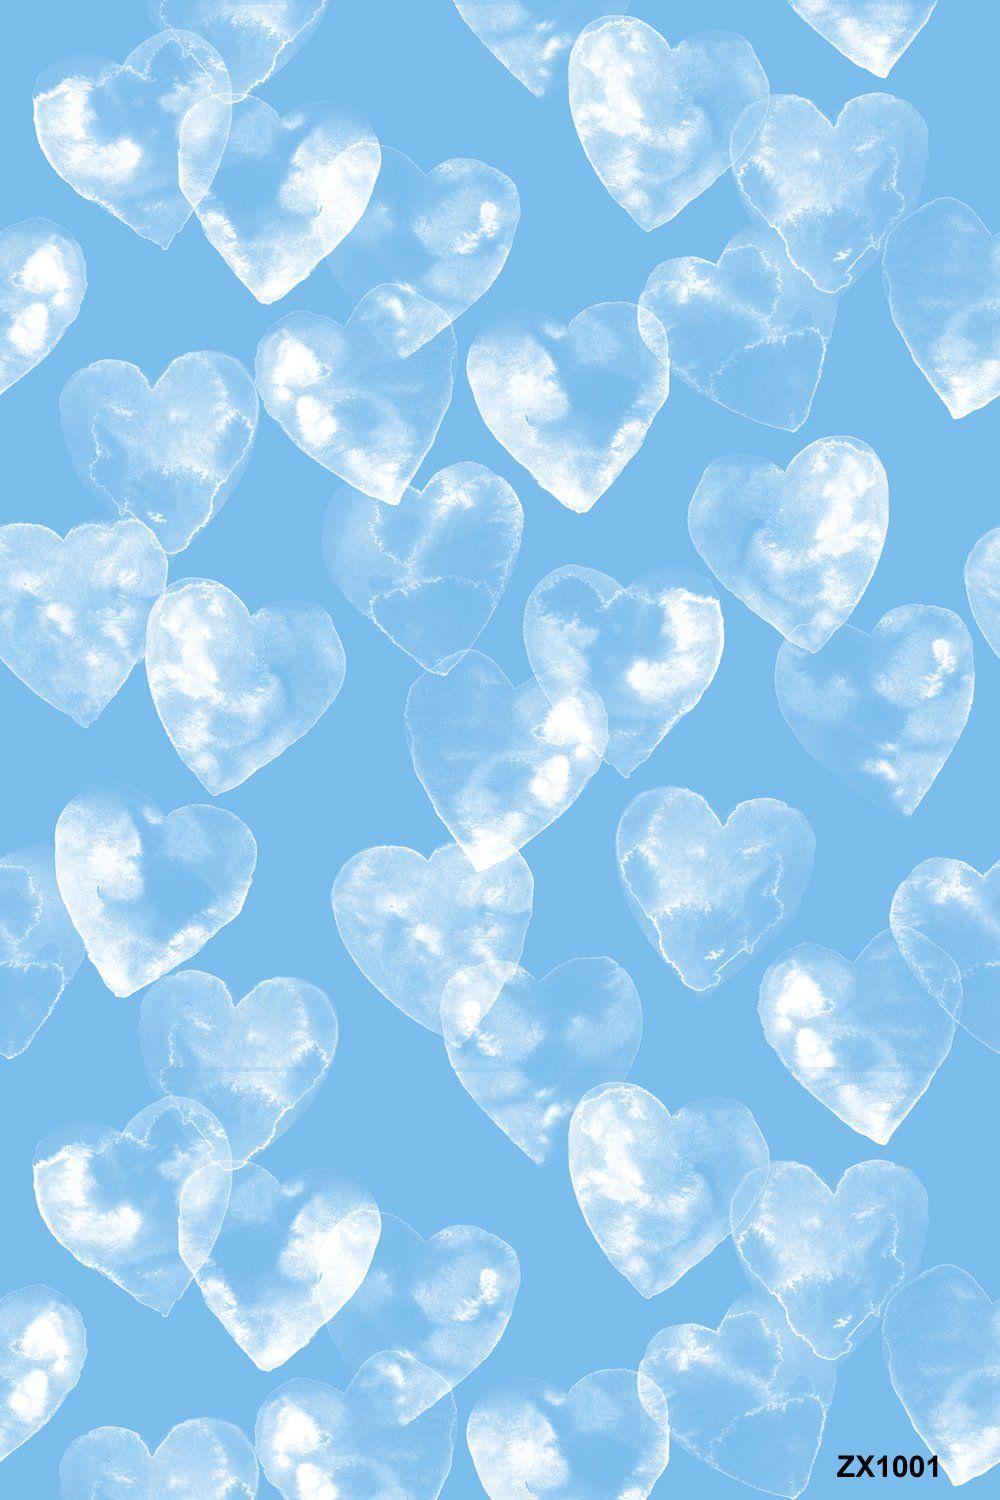 LIFE MAGIC BOX Wrinkle Free Washable Blue Heart Background Valentines Day Backdrops Photo Backdrops. Blue Aesthetic Pastel, Heart Wallpaper, Baby Blue Wallpaper